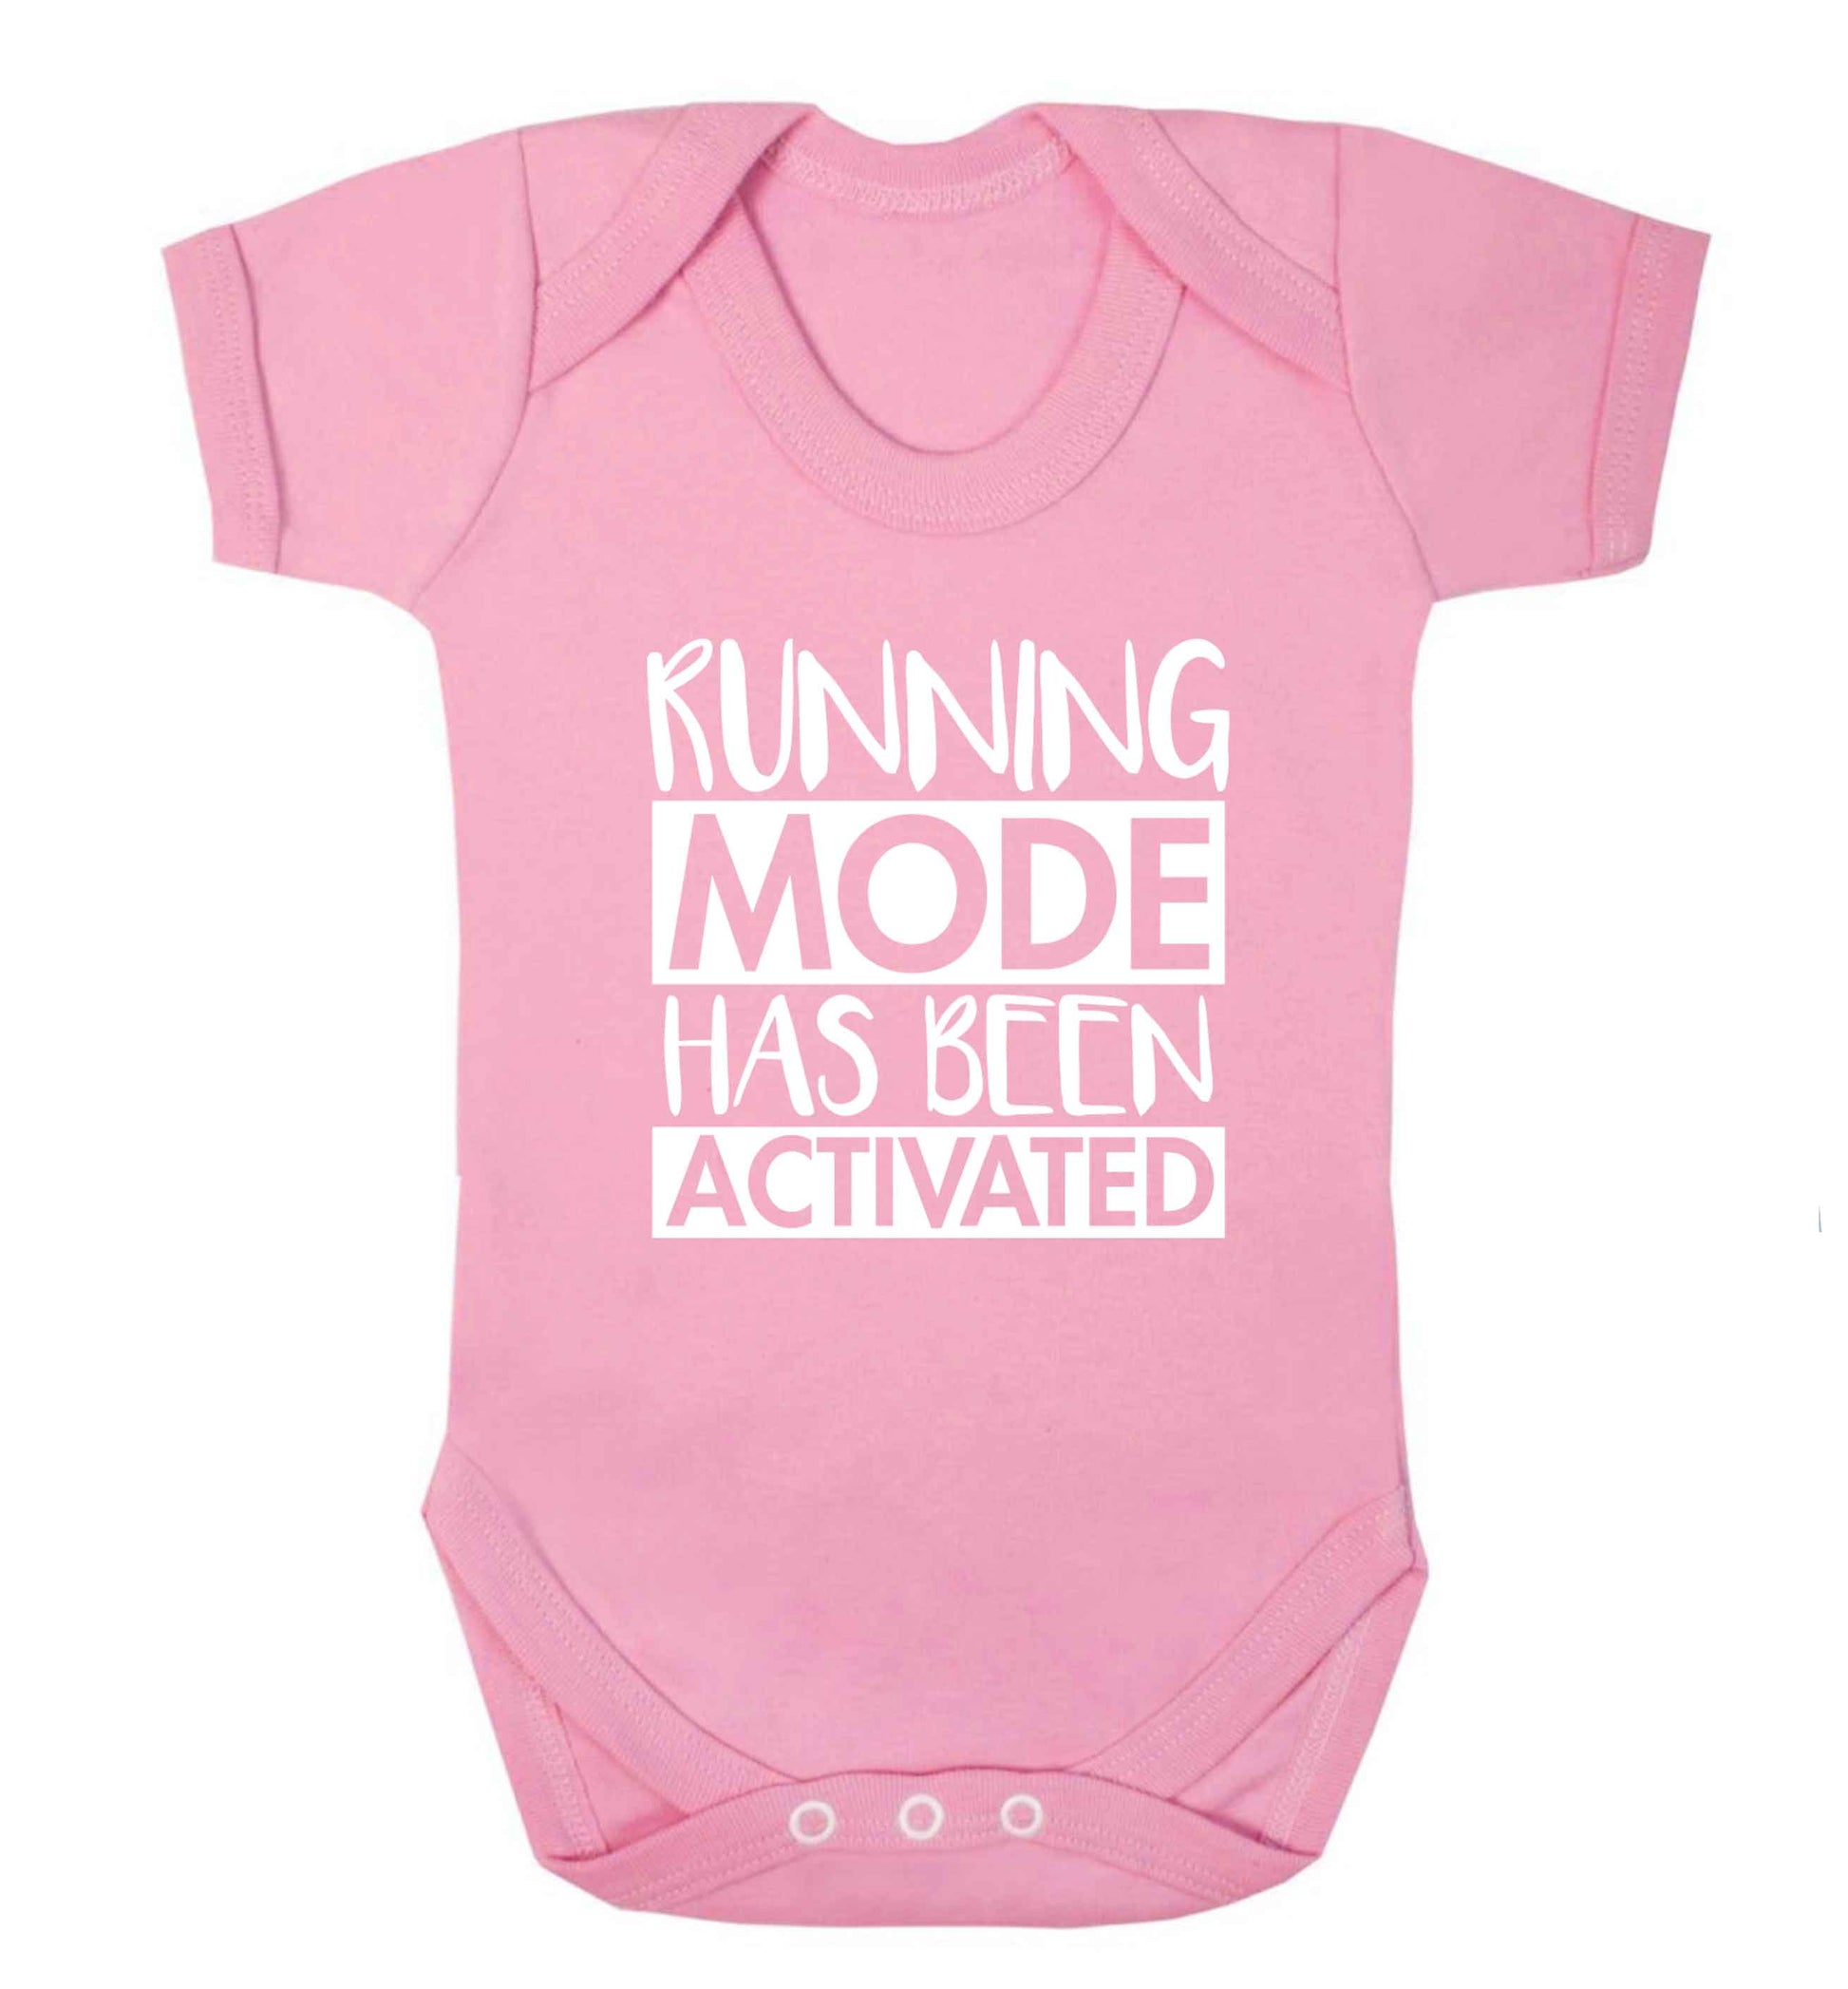 Running mode has been activated baby vest pale pink 18-24 months